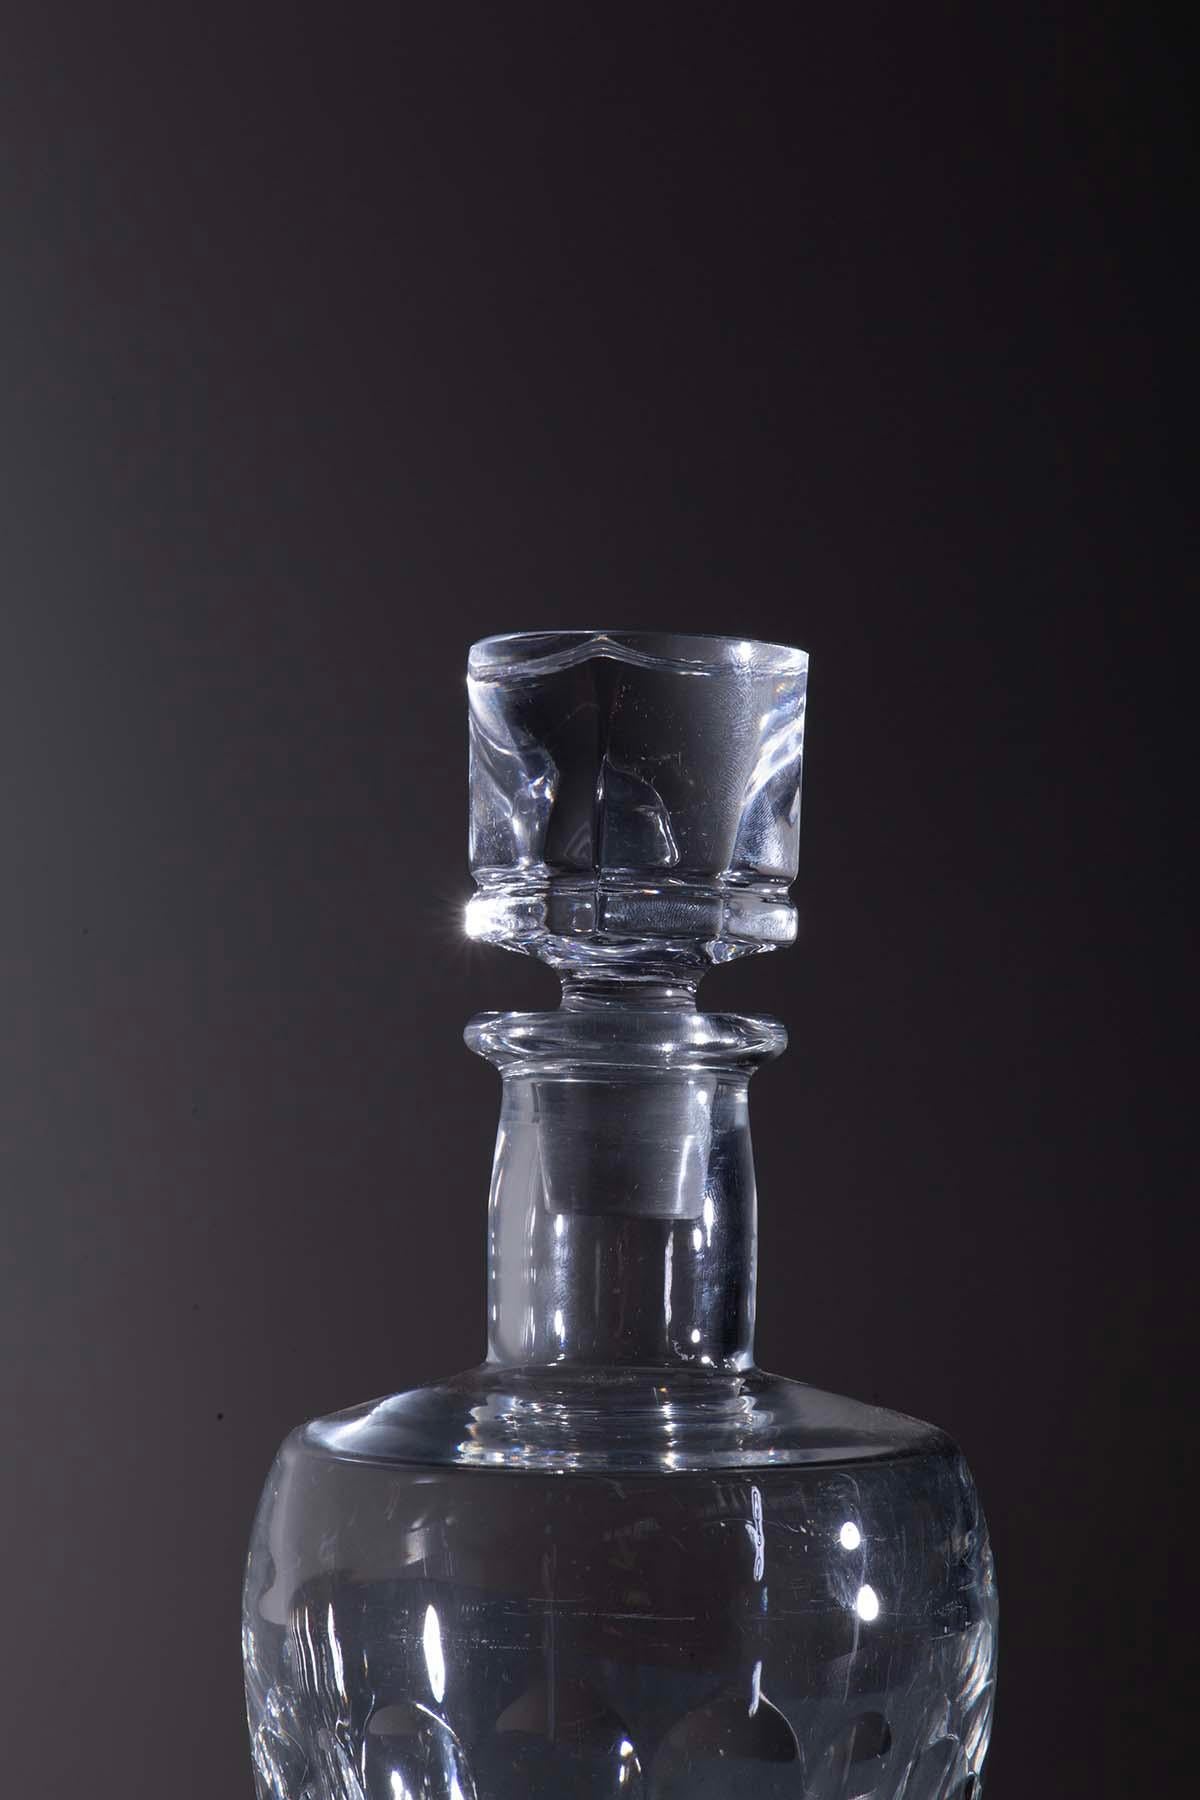 This beautiful decanter is an authentic creation of French craftsmanship from the 1970s, originating from a private Milanese home. Crafted from fine Baccarat crystal, it represents the epitome of sophistication. Baccarat crystal is renowned for its